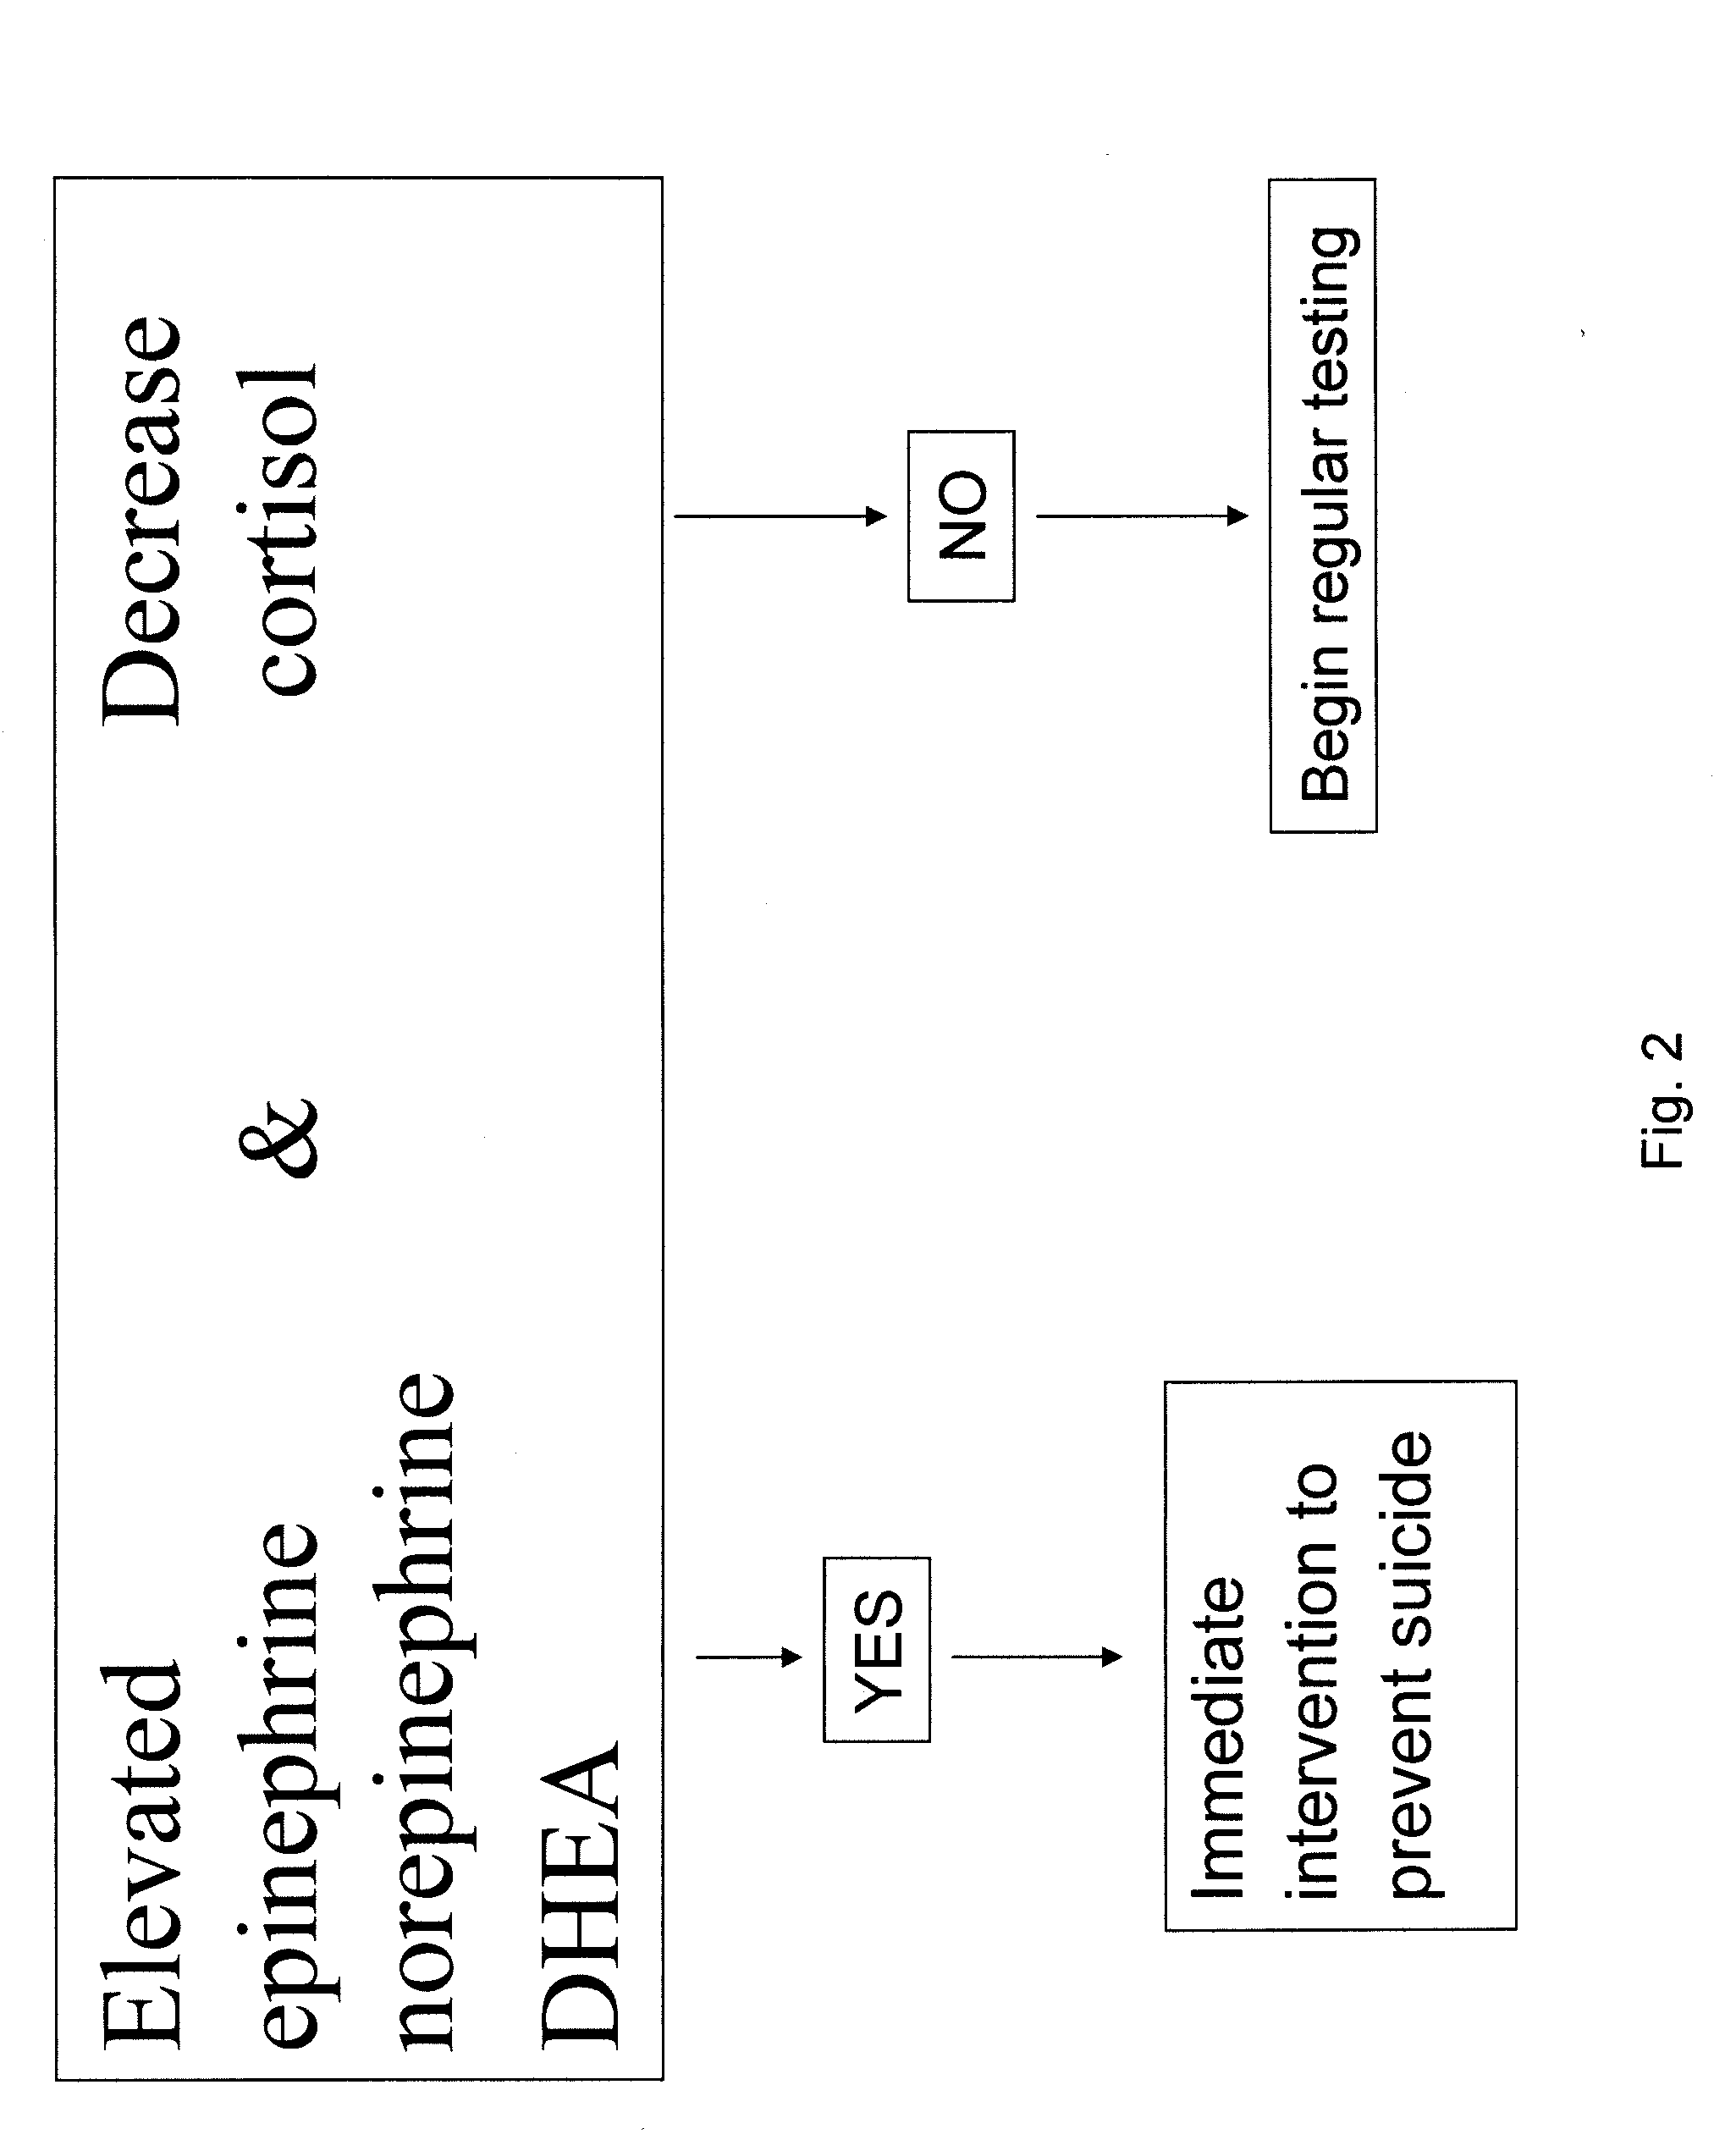 Method for Treating Stress Related Disorders